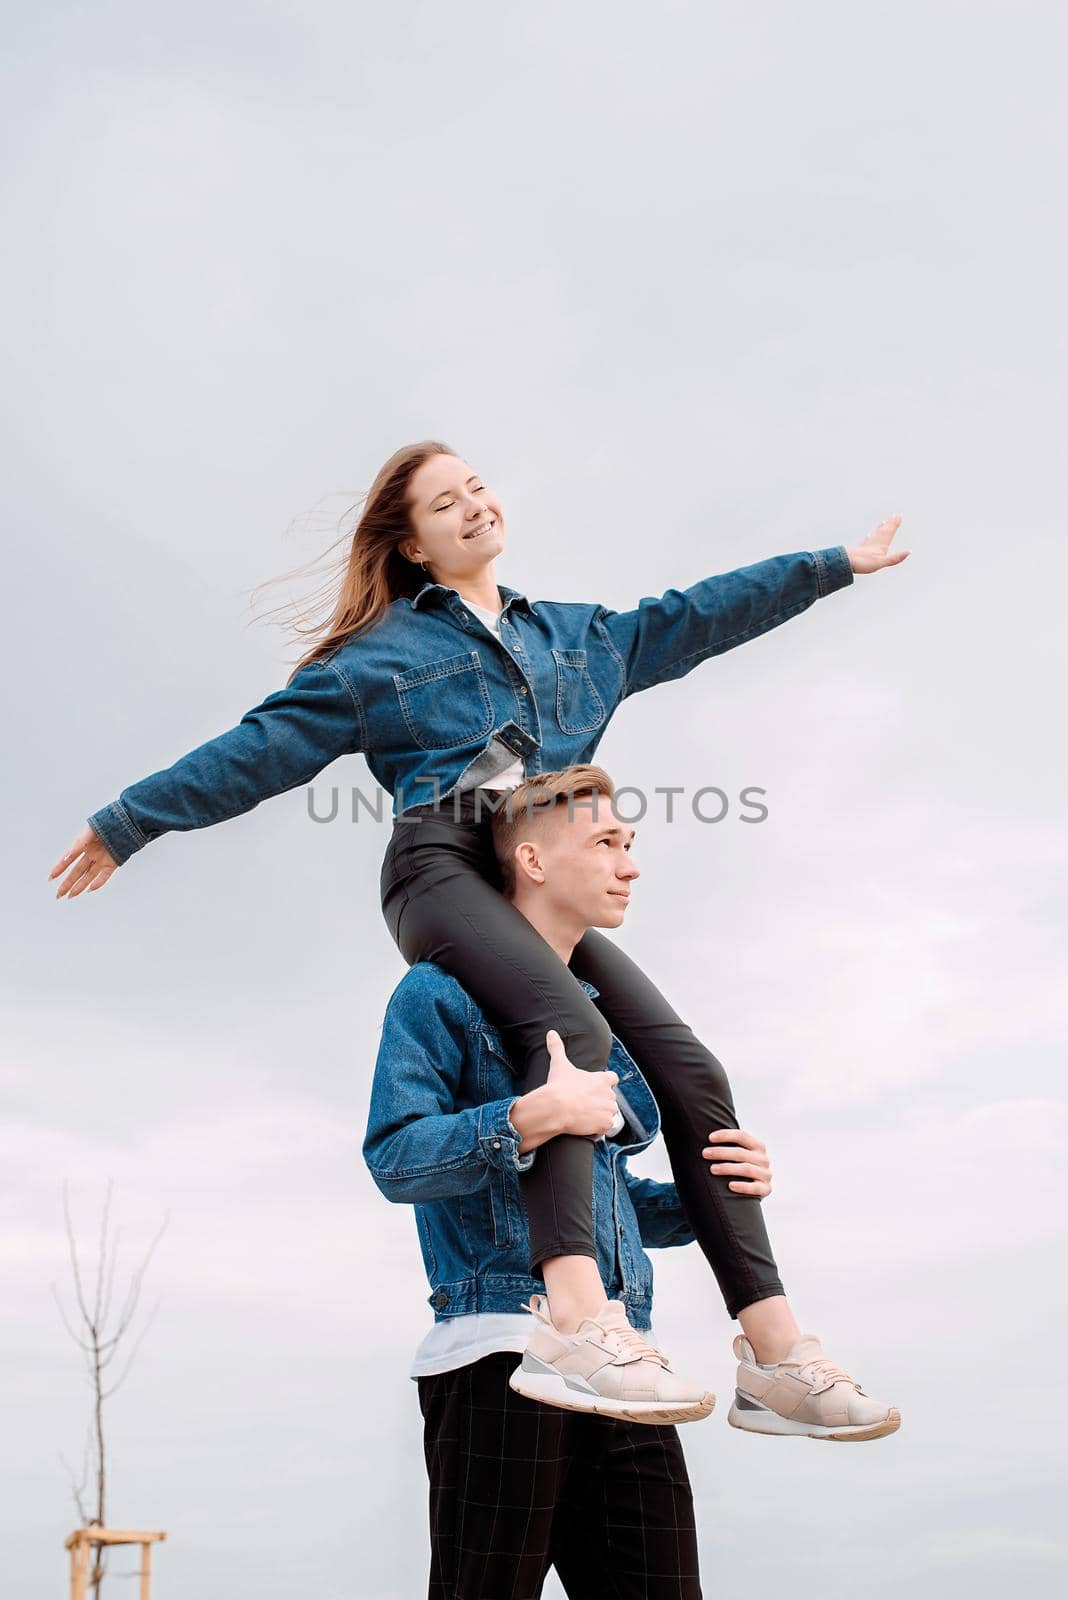 Young loving couple wearing jeans spending time together in the park having fun